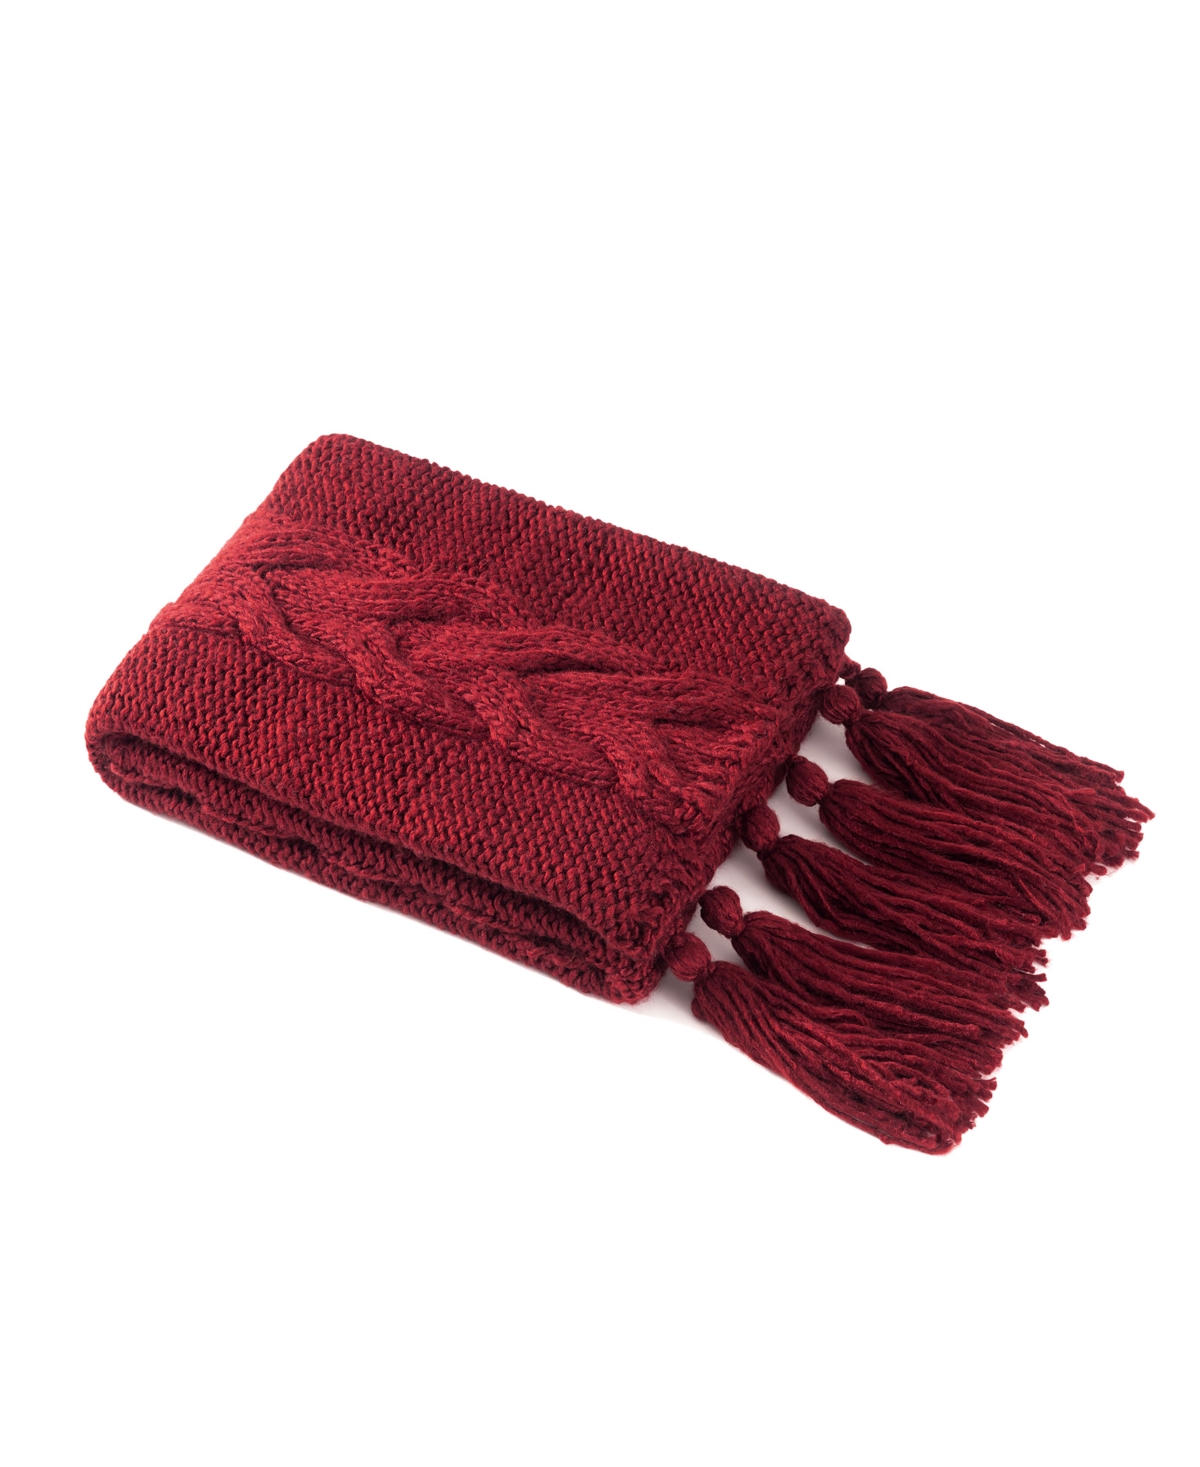 Patricia Nash Signature Knit Tasseled Throw, 50" X 60" In Red